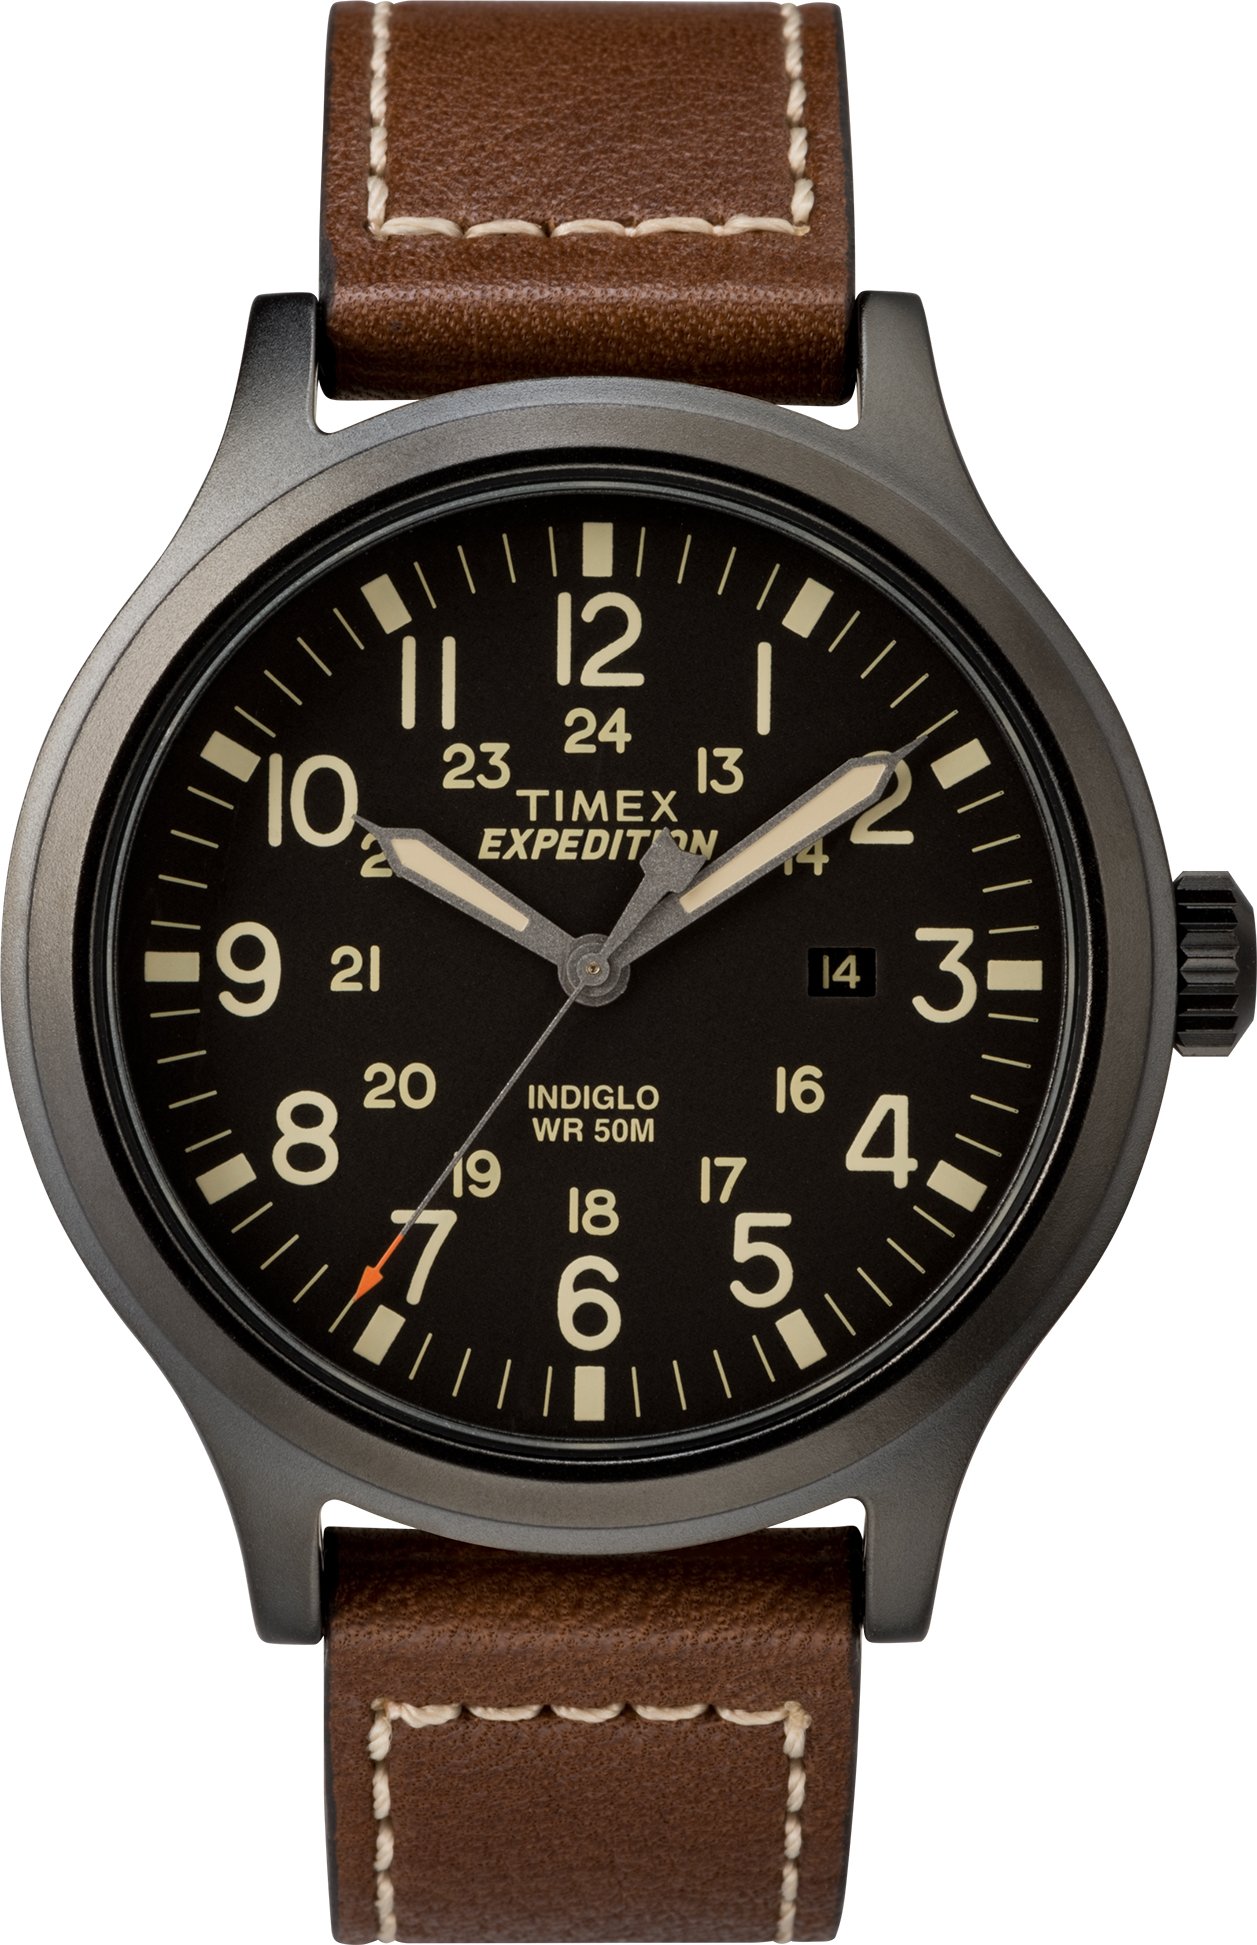 Timex Men's TW4B11300 Expedition Scout 43mm Brown/Black Leather Strap Watch $40.78